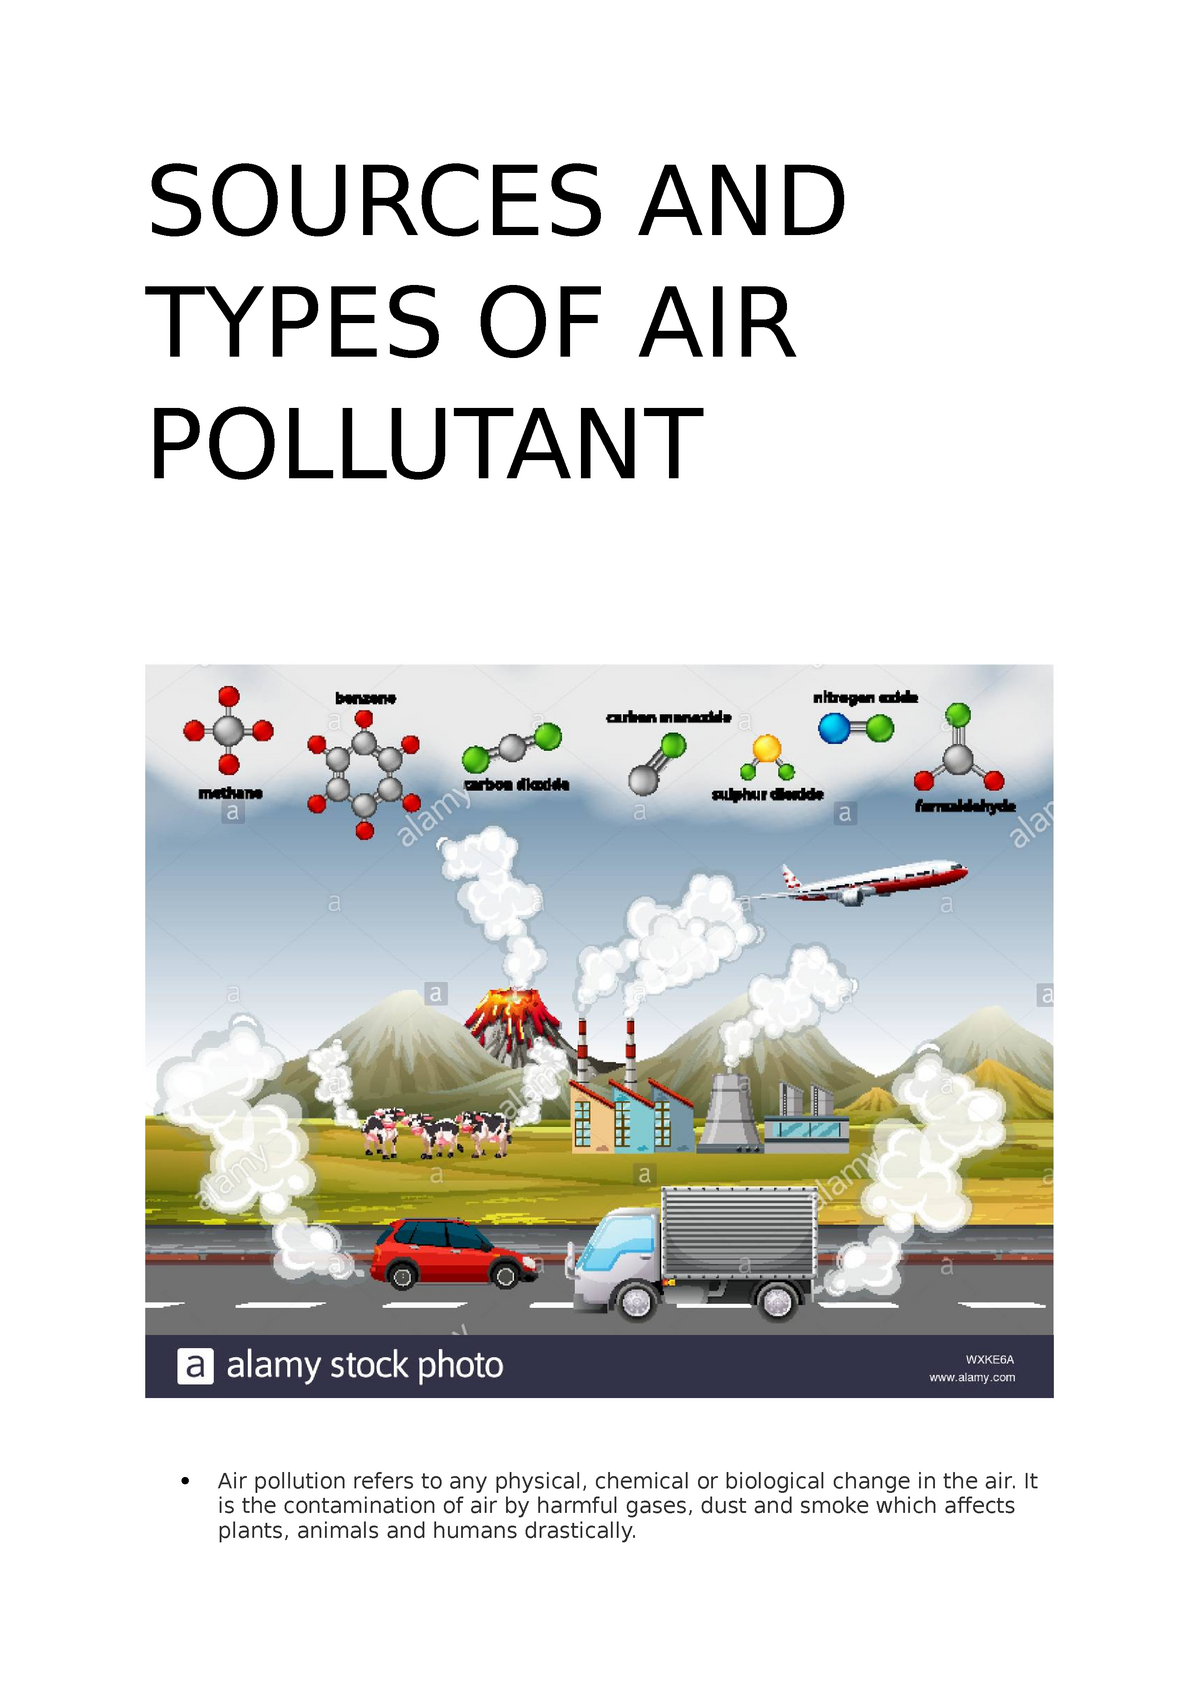 Sources And Types Of Air Pollutant Sources And Types Of Air Pollutant Air Pollution Refers To 3106